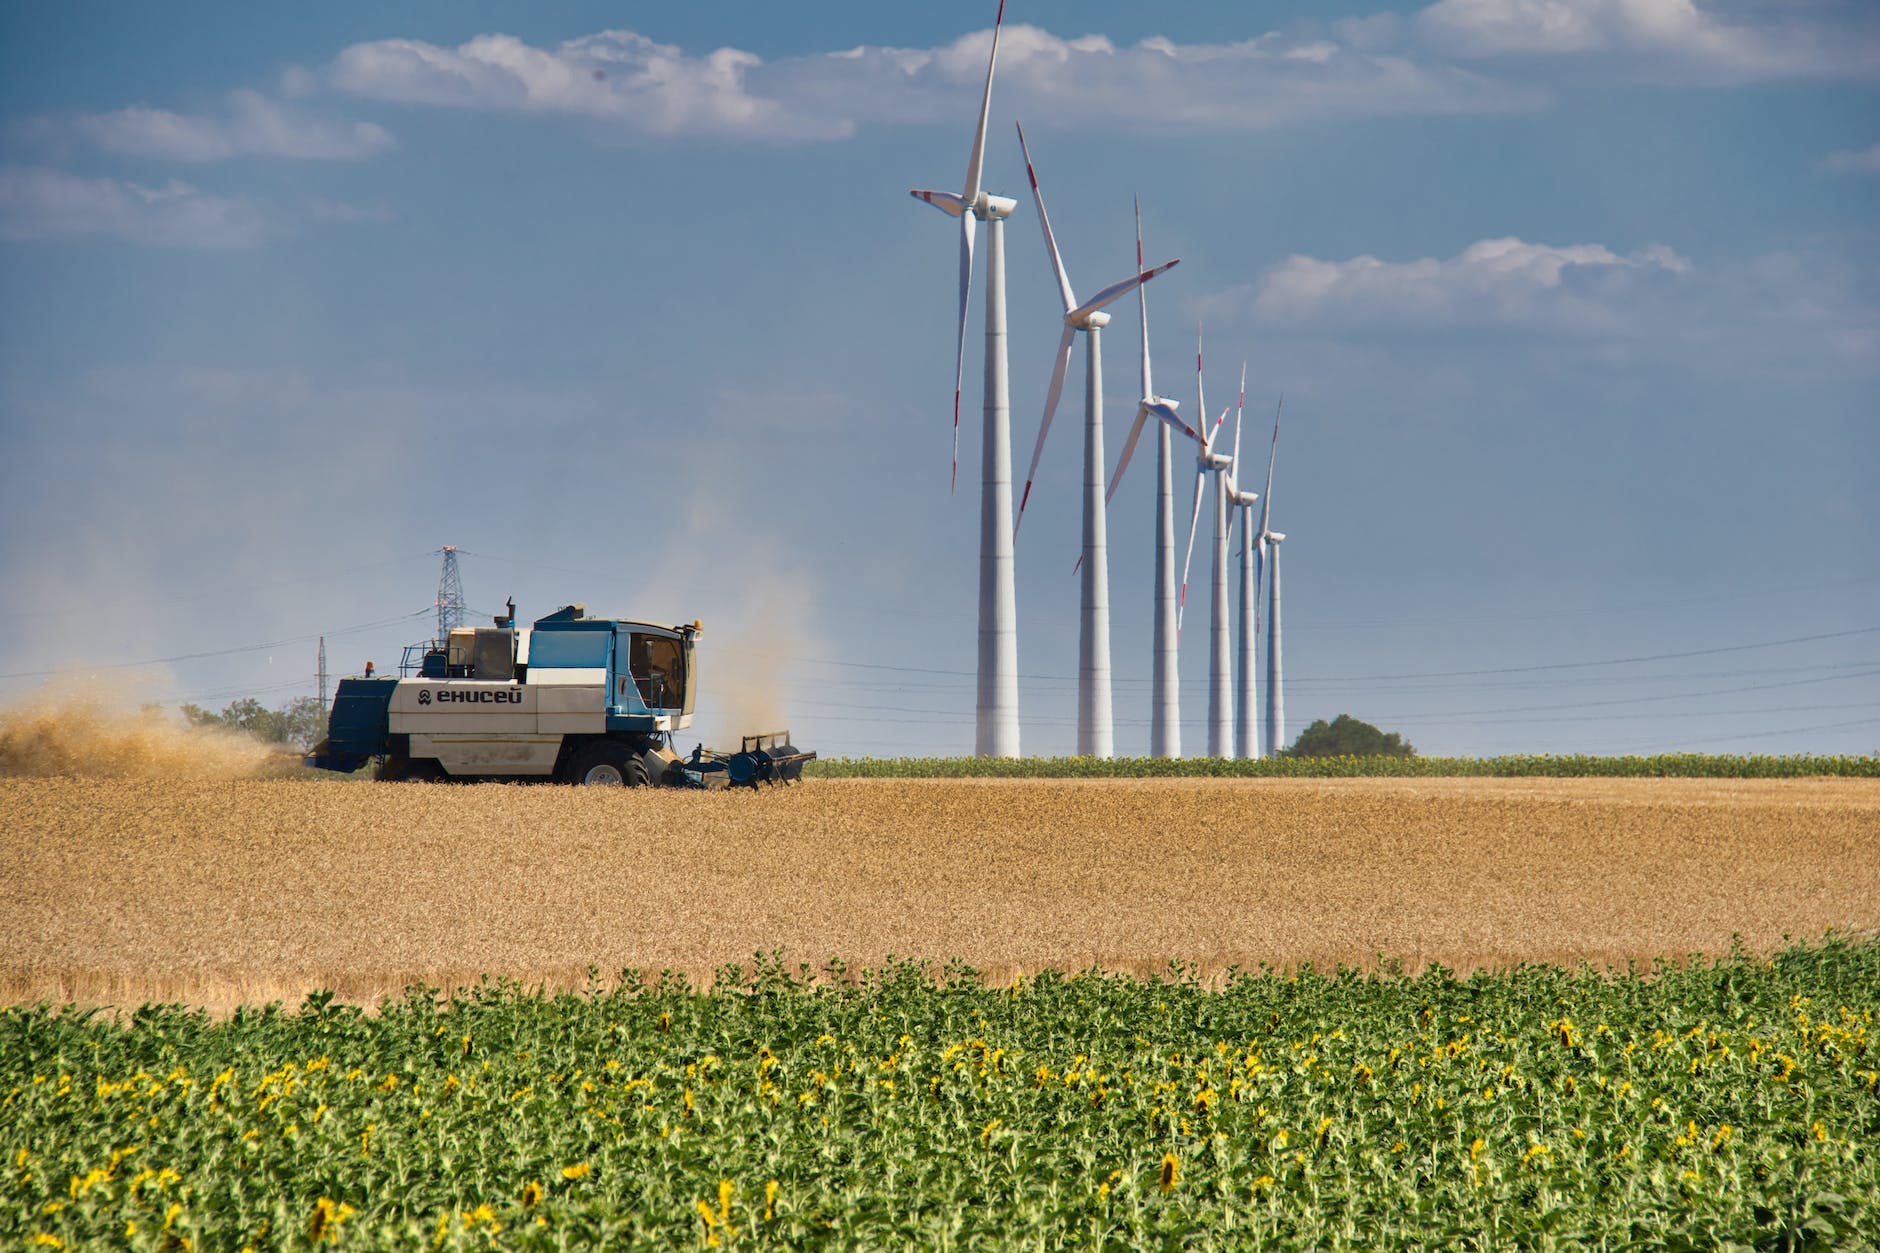 machine harvesting and wind turbine under white clouds and blue sky